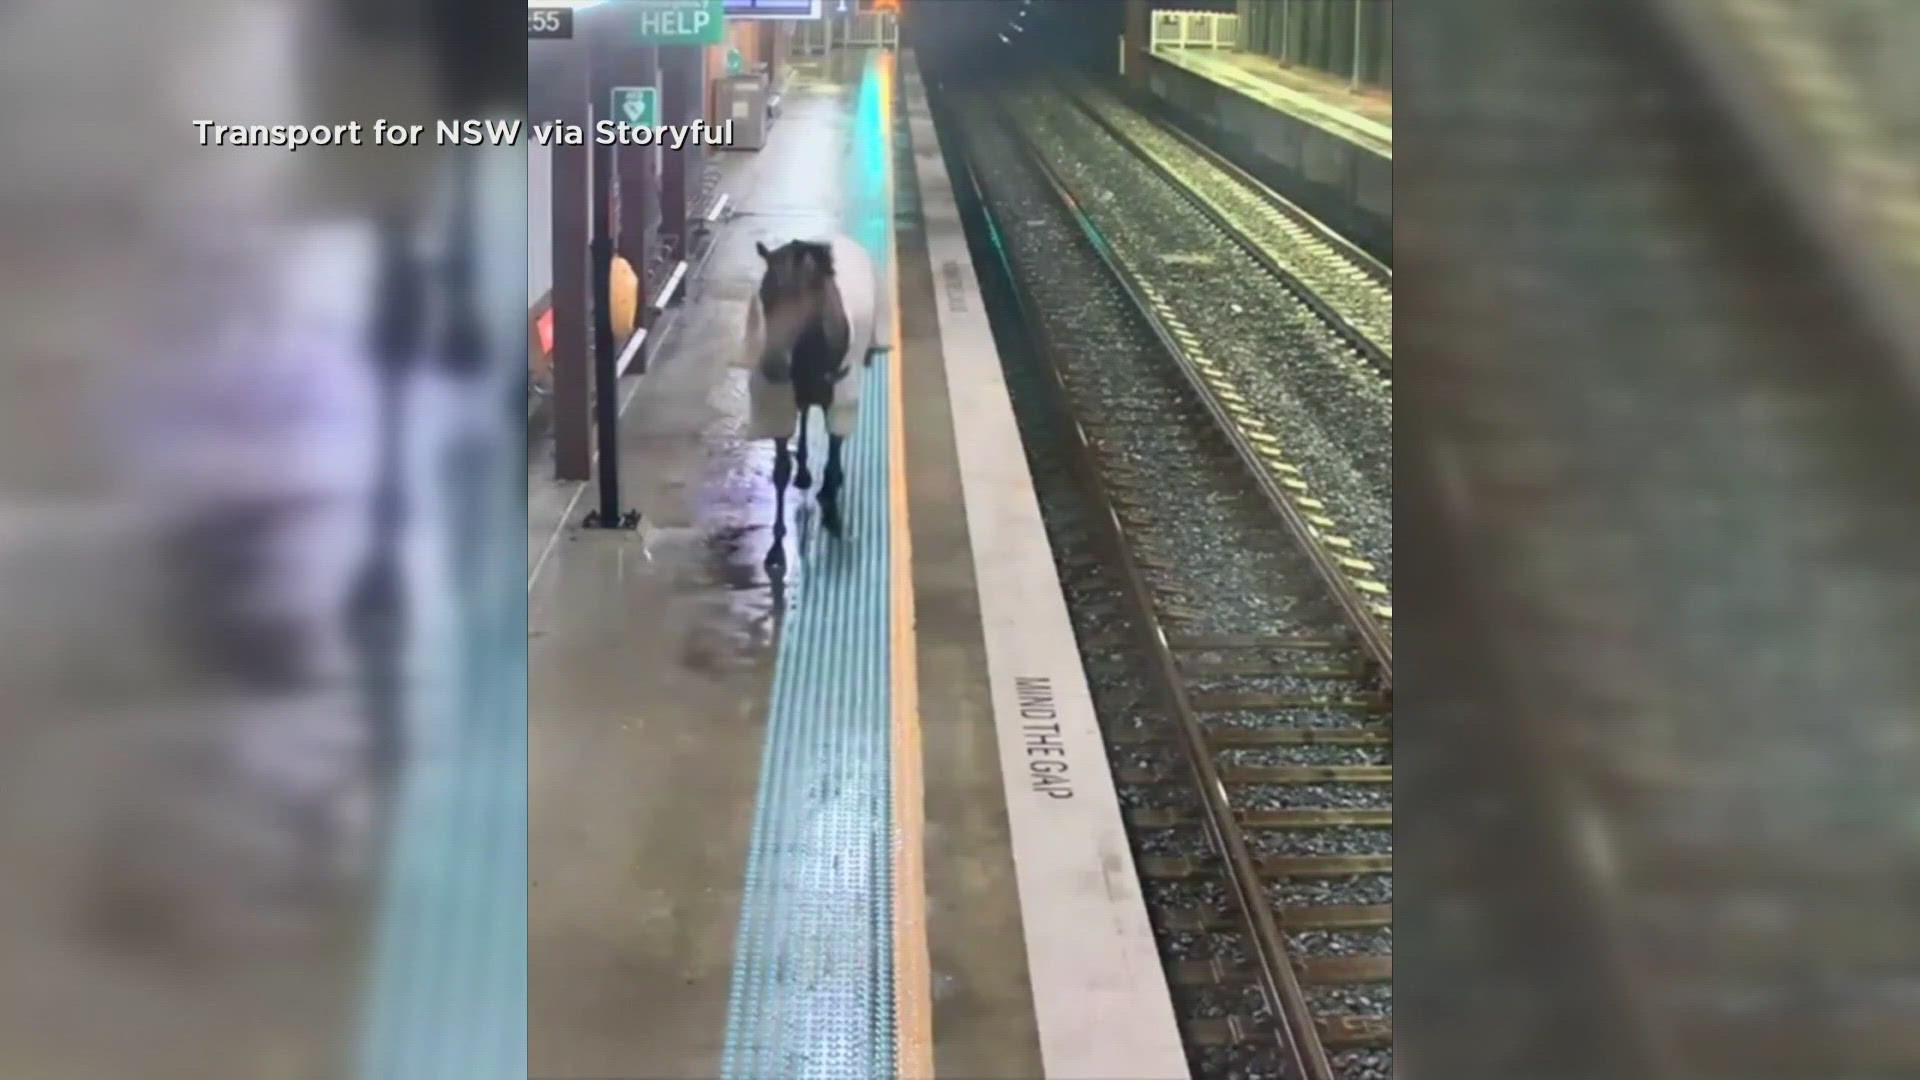 The horse was quickly wrangled before getting on a train.